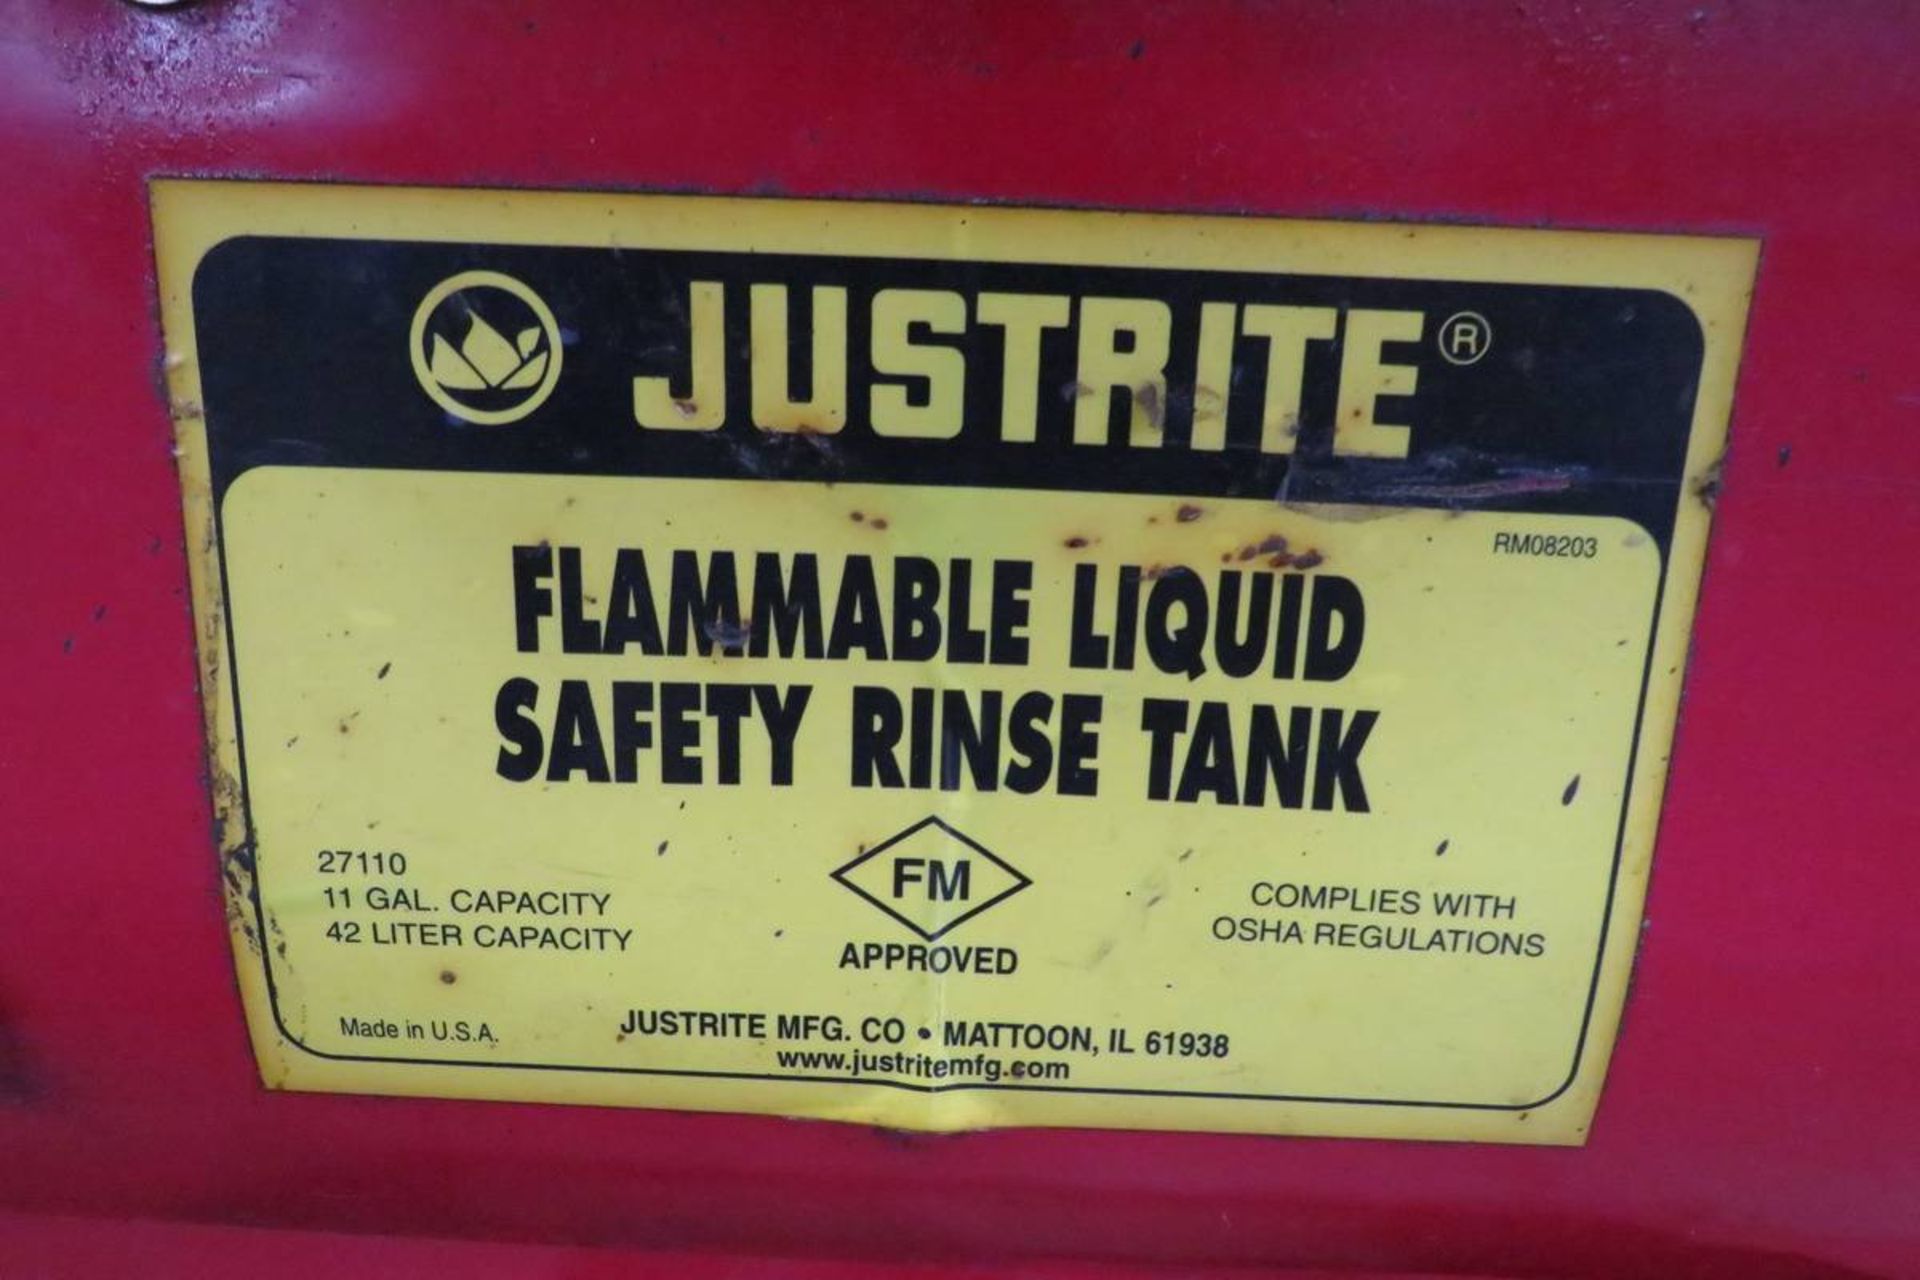 Justrite 27110 11 Gal. Flammable Liquid Safety Rinse Tank - Image 3 of 3